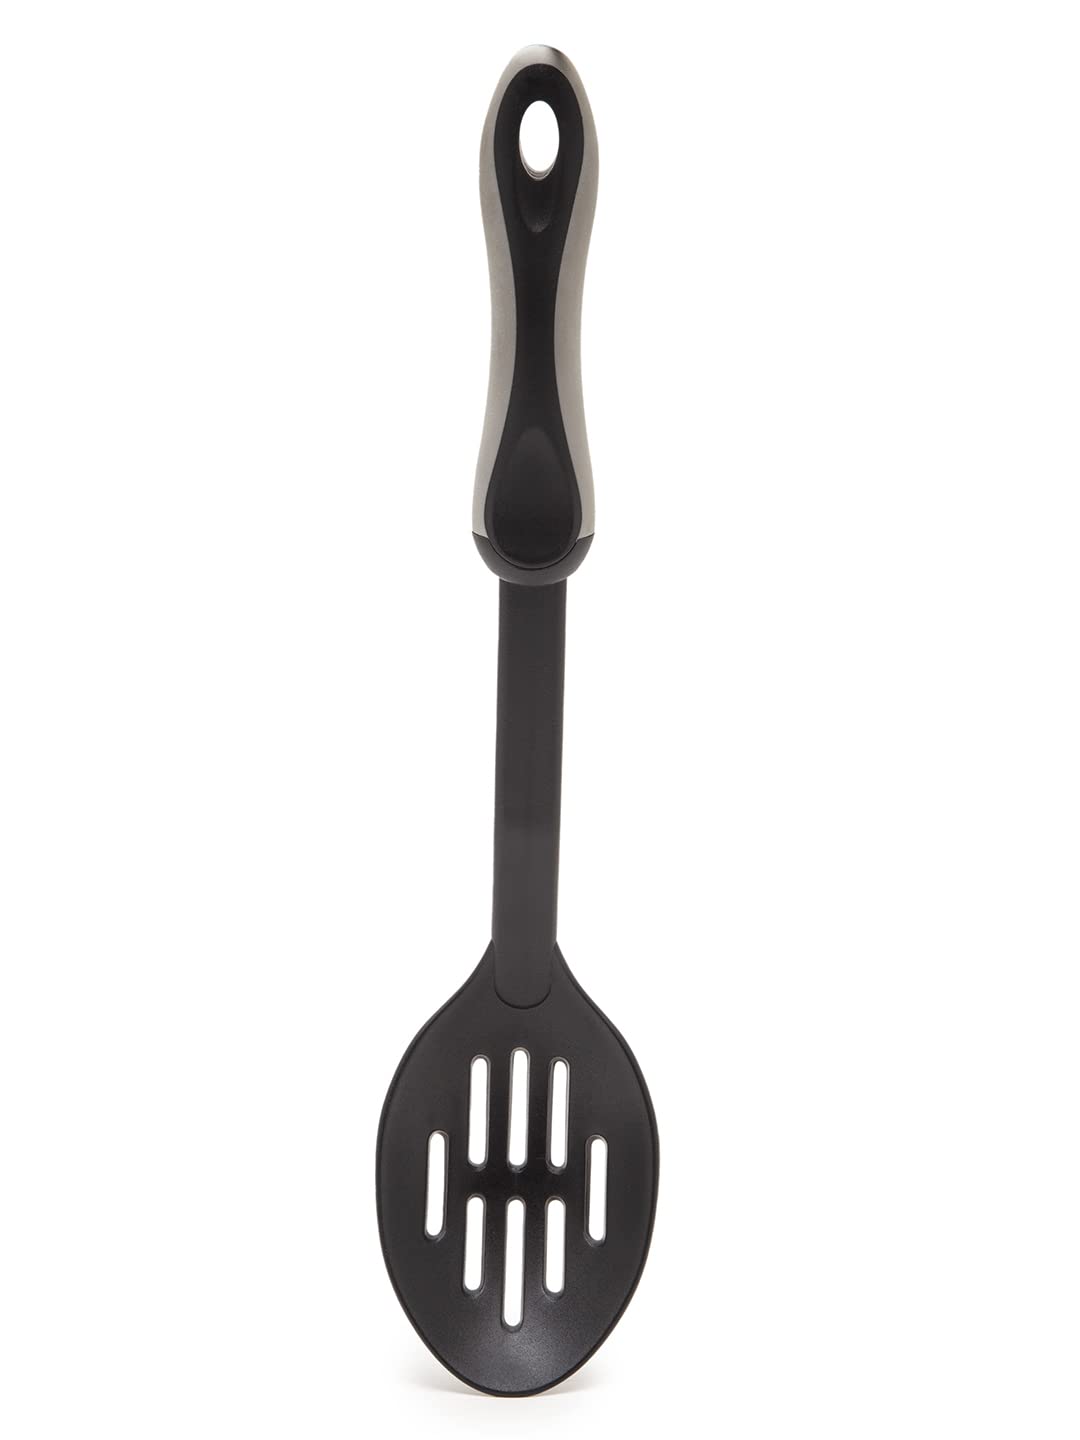 Nylon Slotted Spoon and Masher